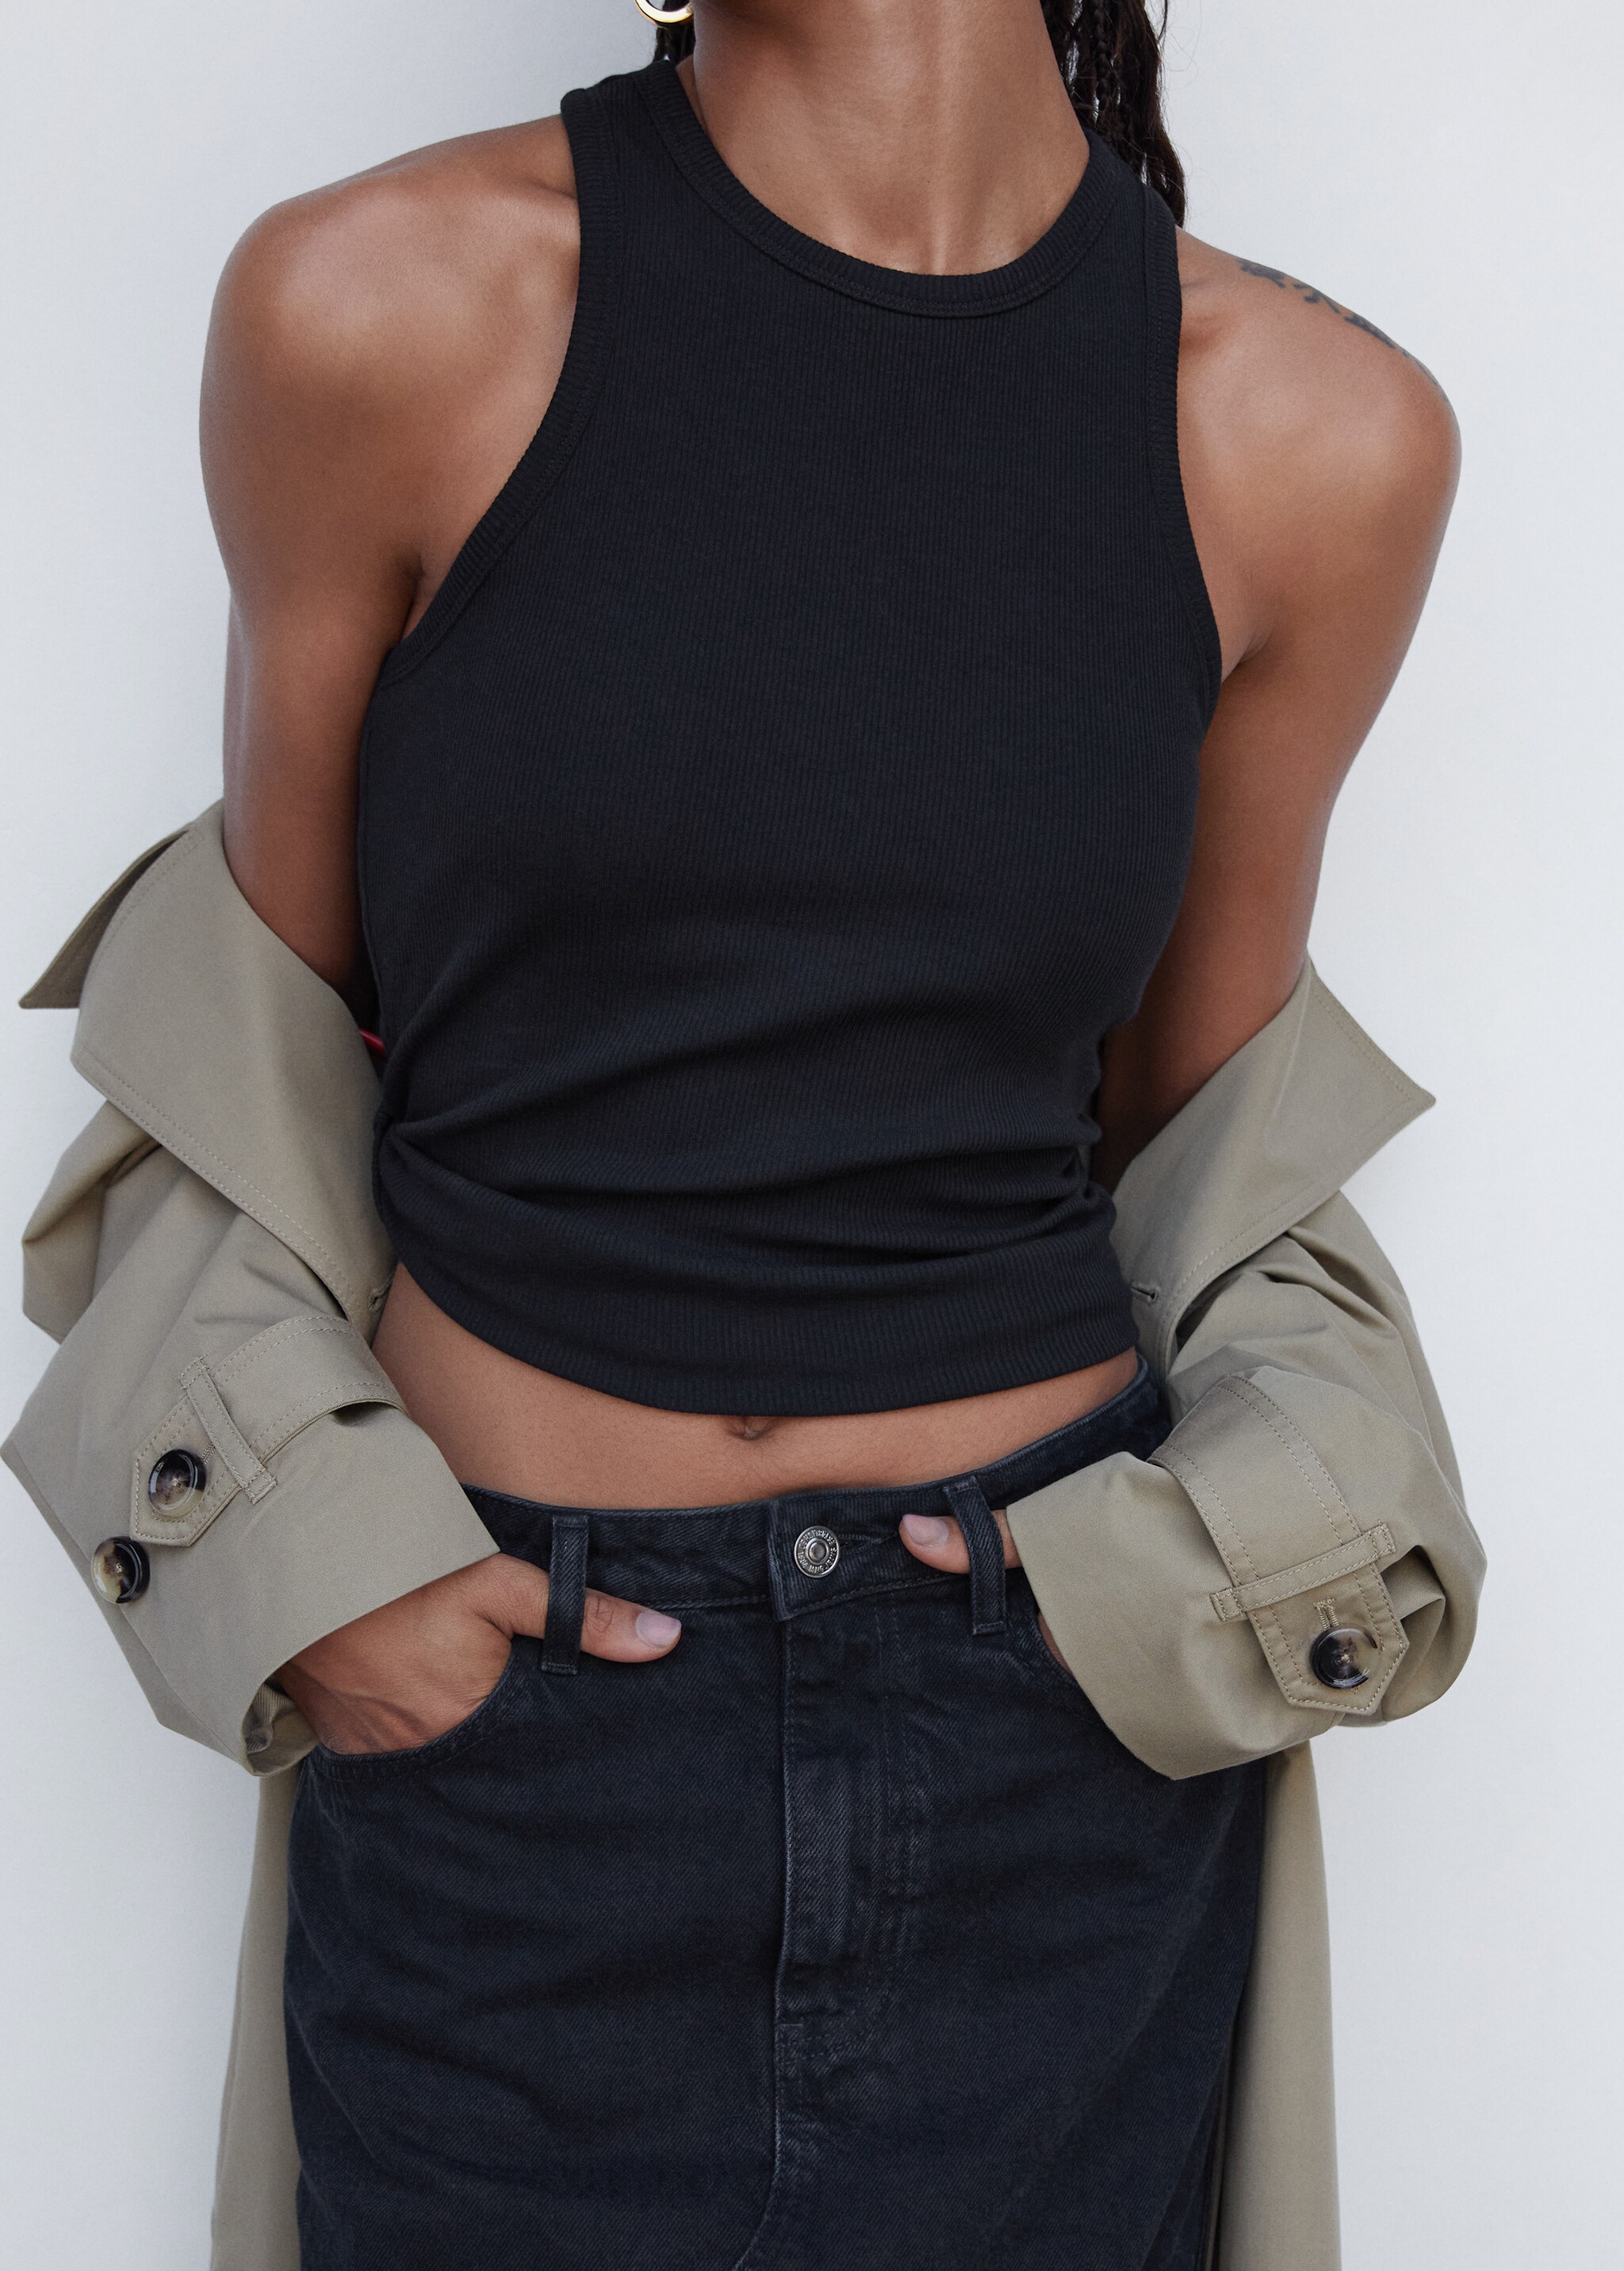 Halter top with low-cut back - Details of the article 6